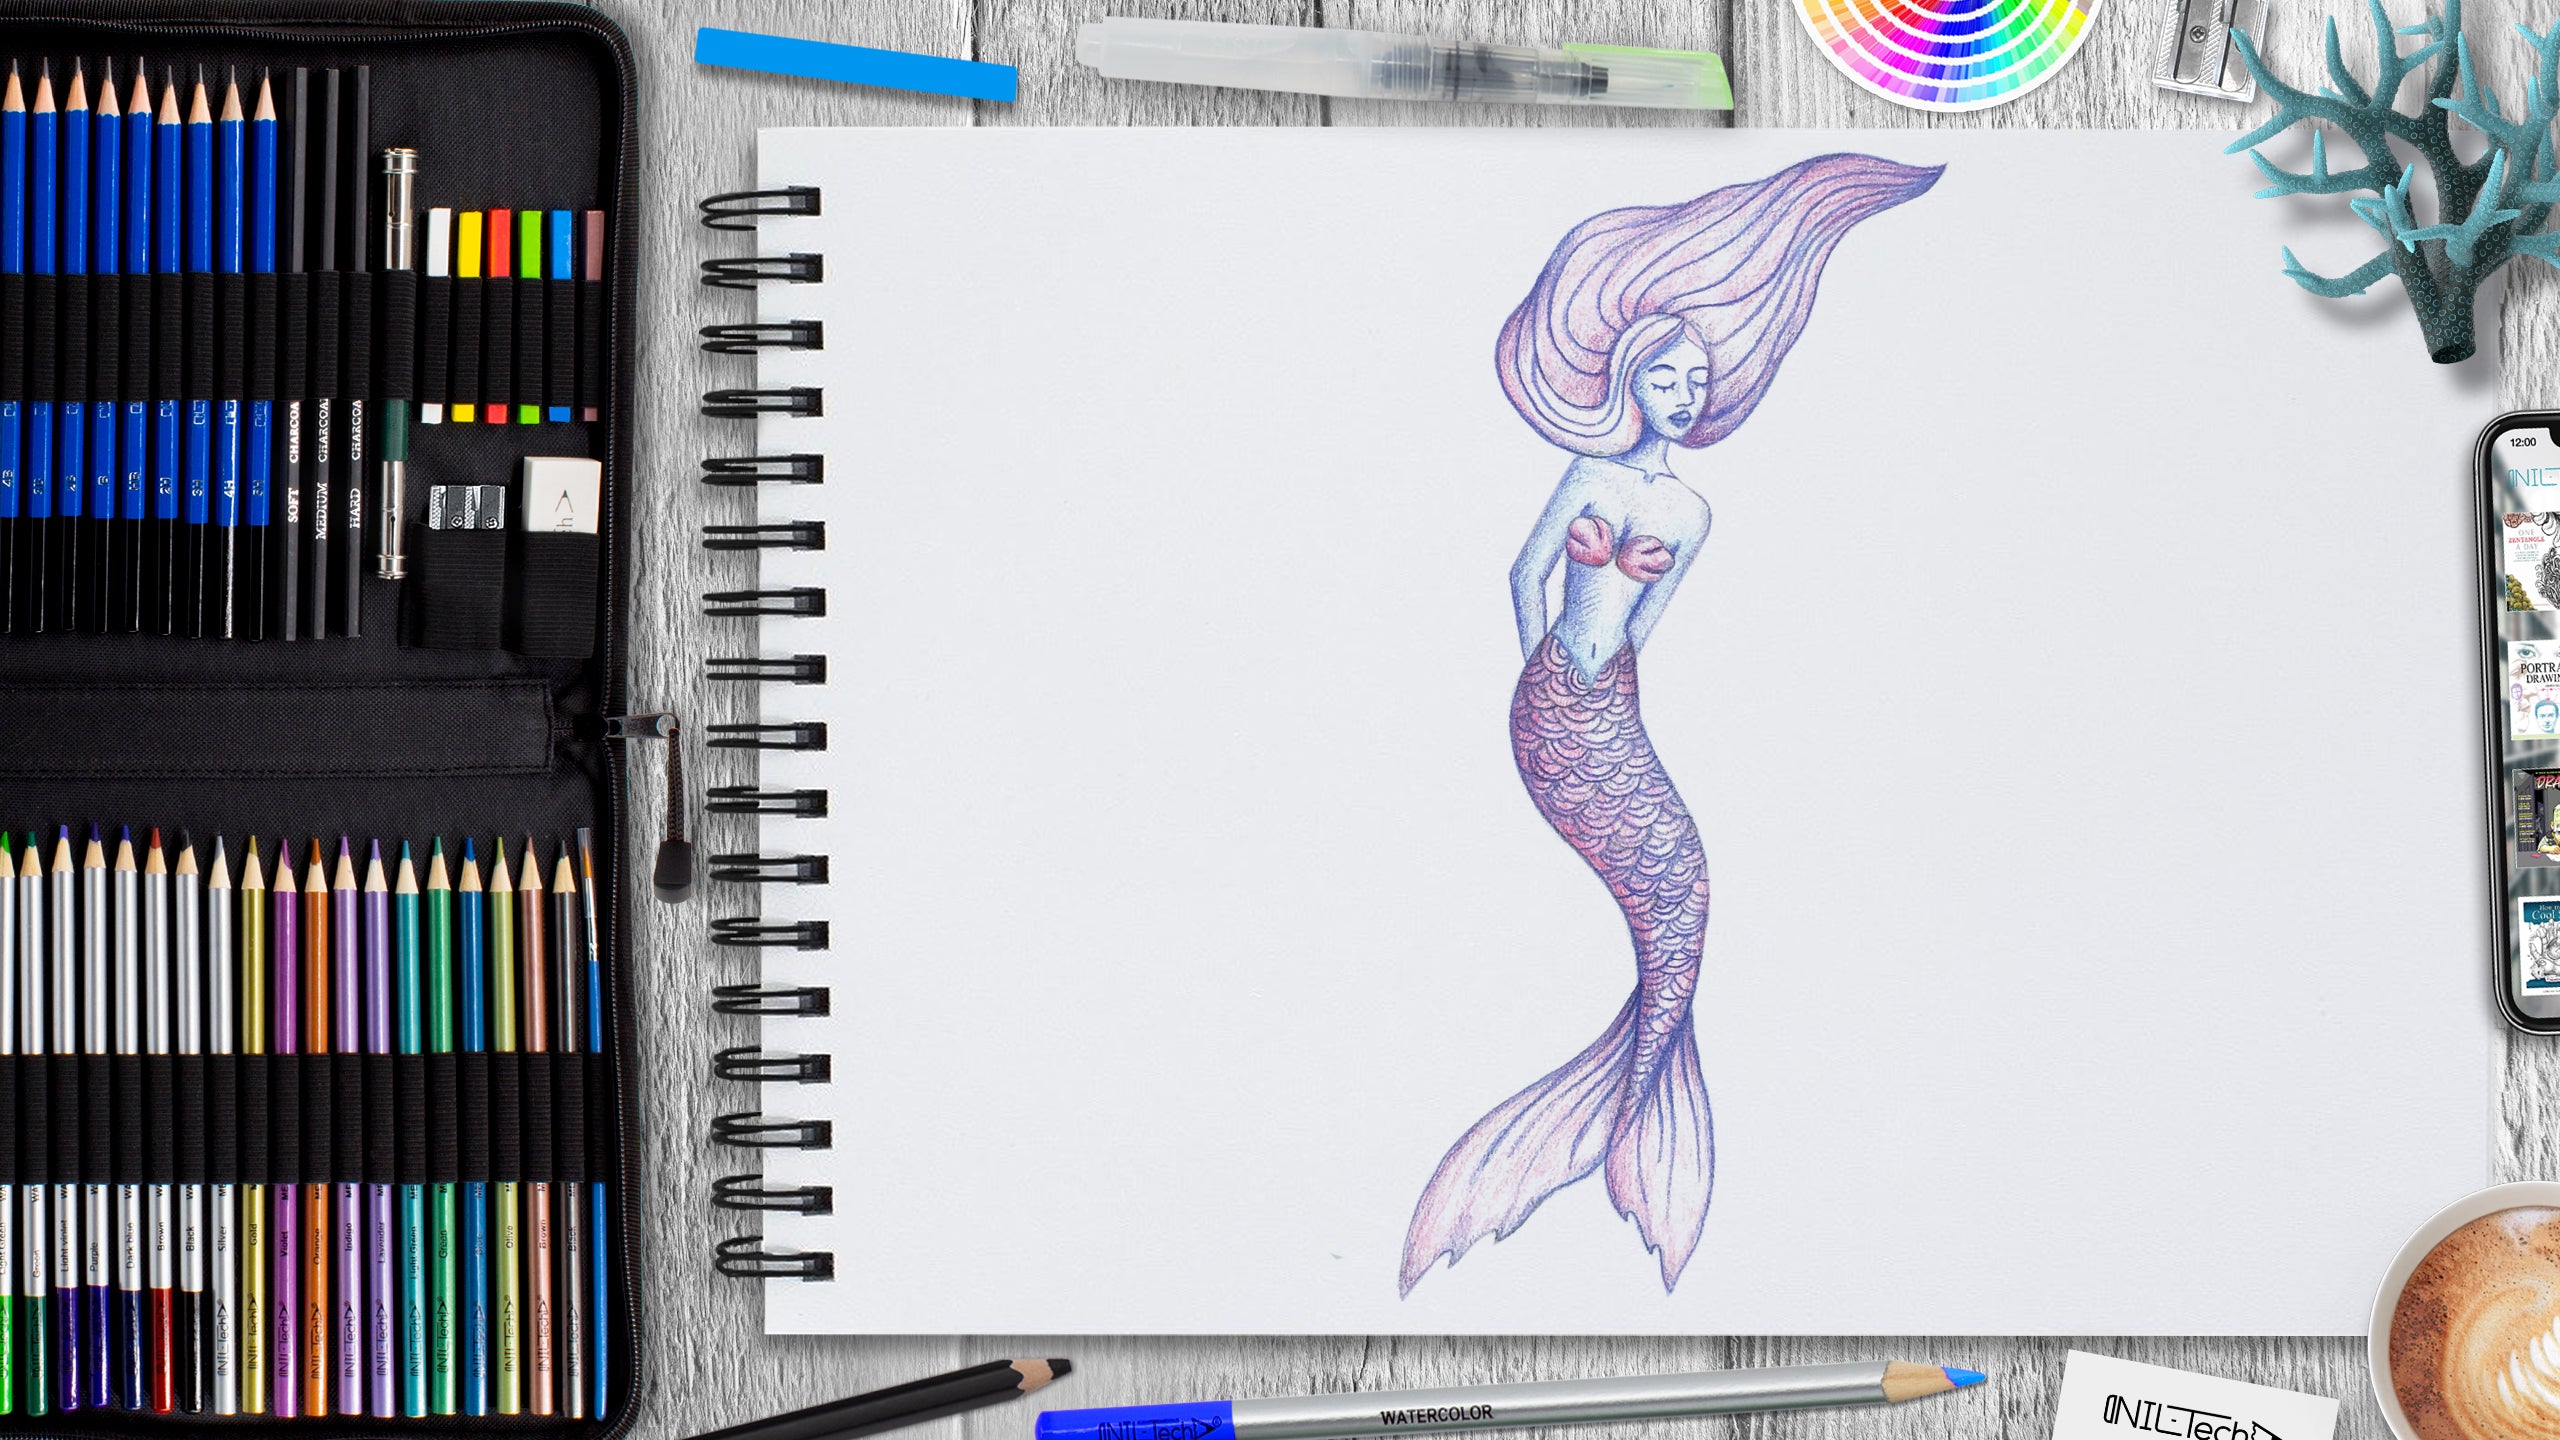 How to Draw a Mermaid with Your Favorite Fin Fun Mermaid Tail